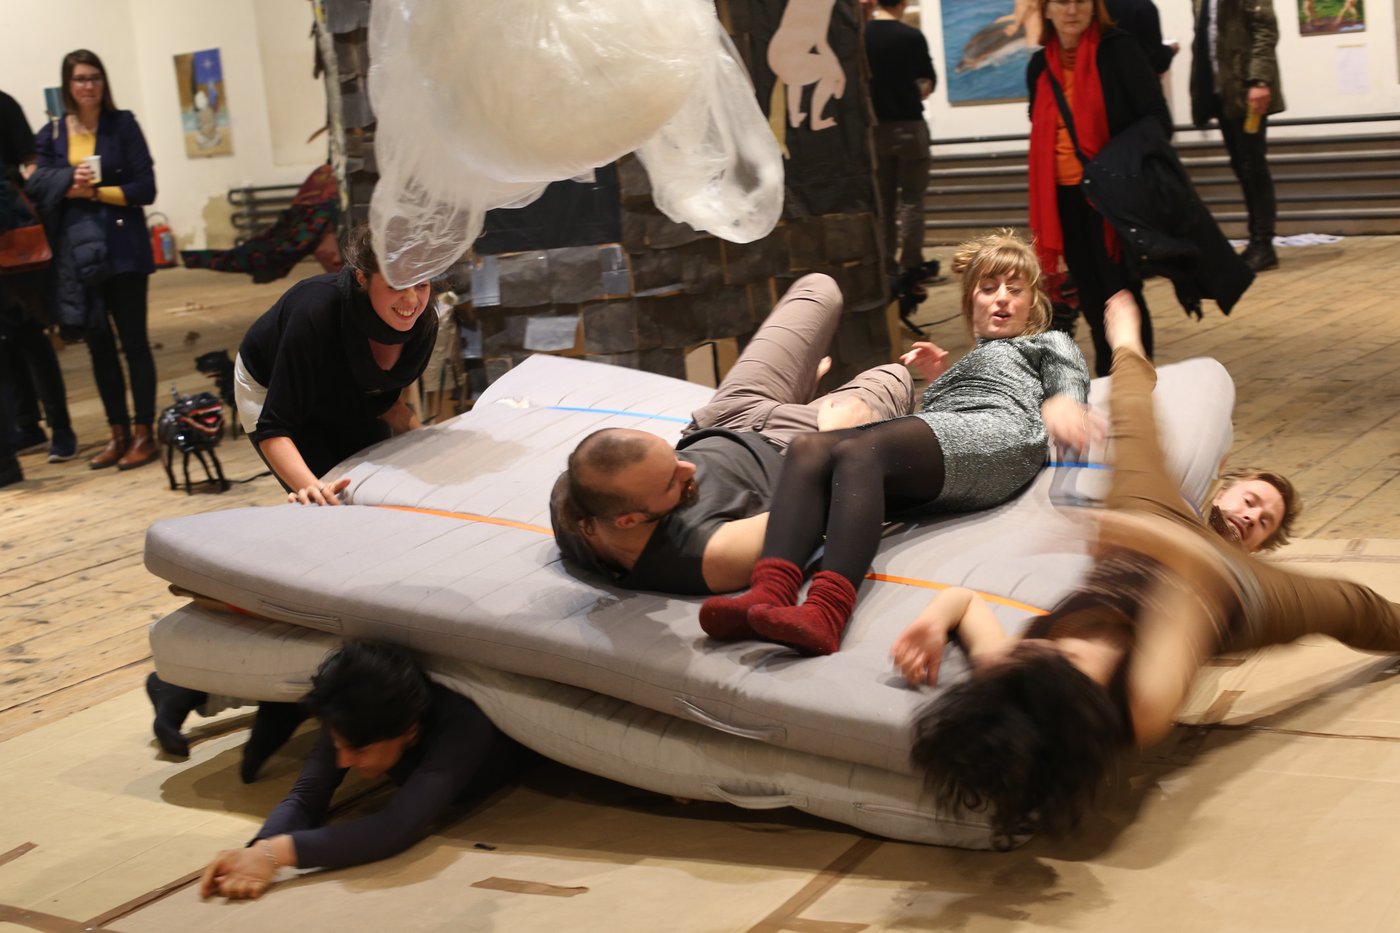 Young people are fooling around on a pile of mattresses. The situation seems very exuberant. In the background you can see some visitors of the tour and other works.